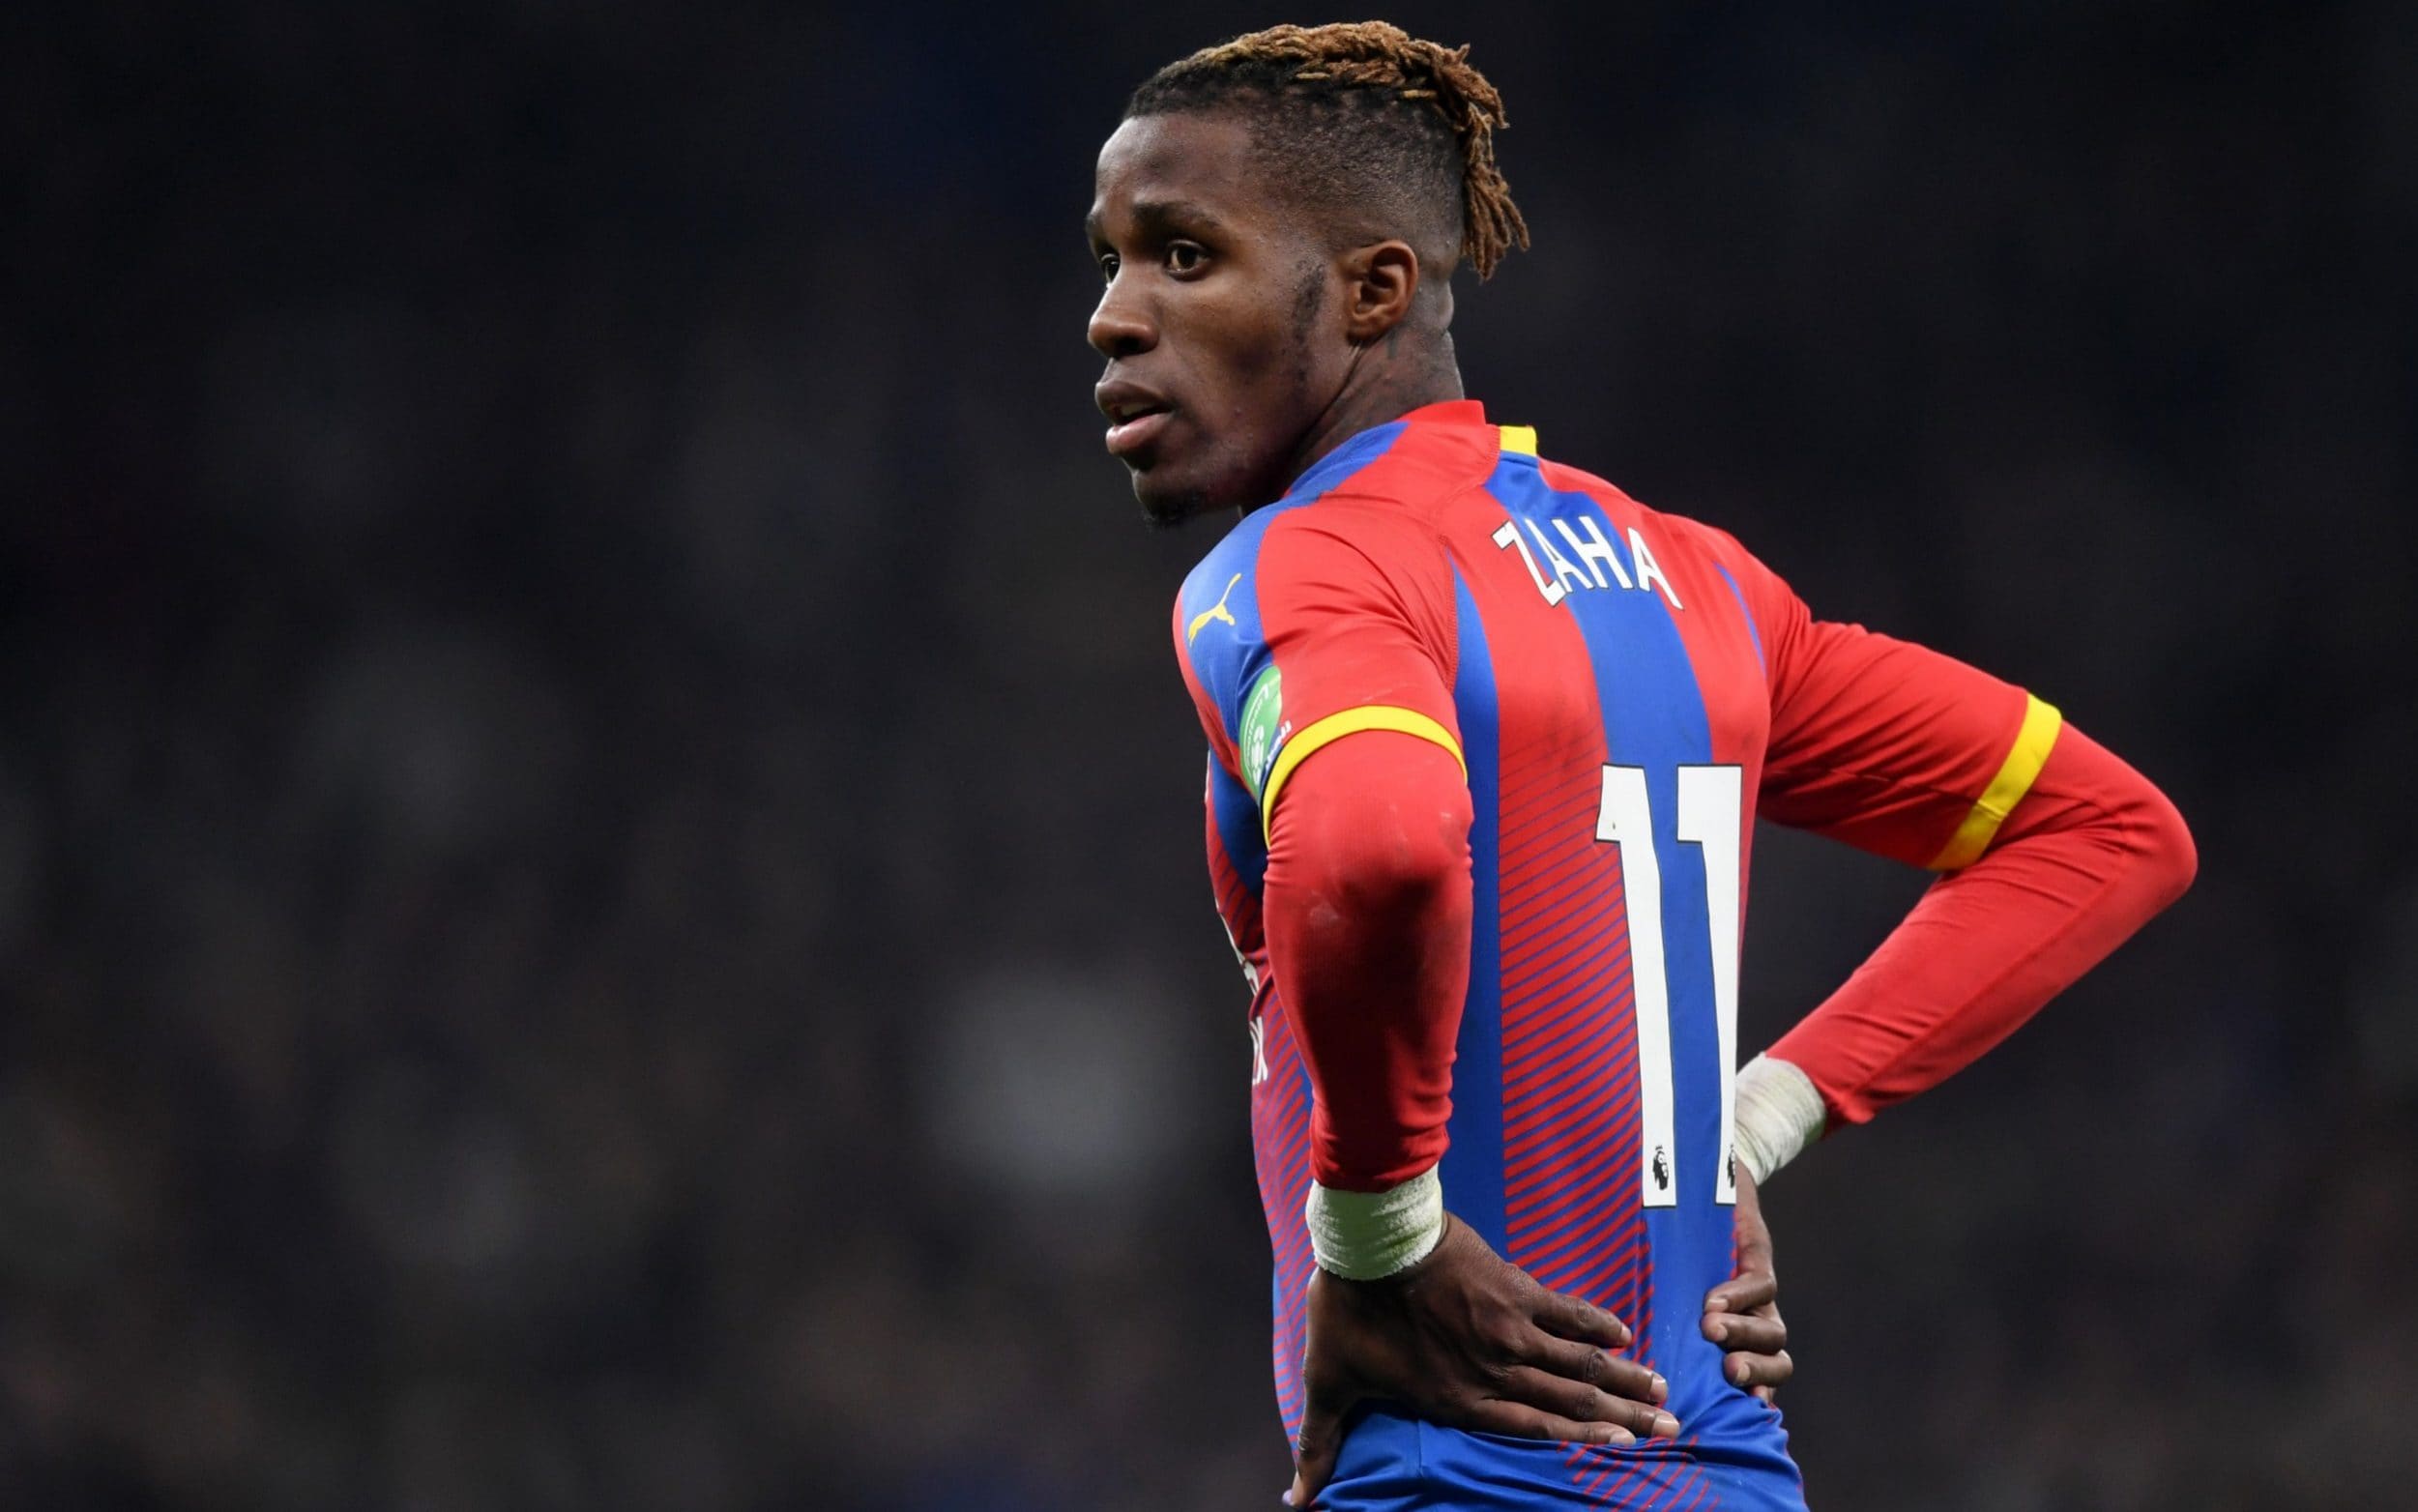 Wilfried Zaha devastated after Crystal Palace stand firm against